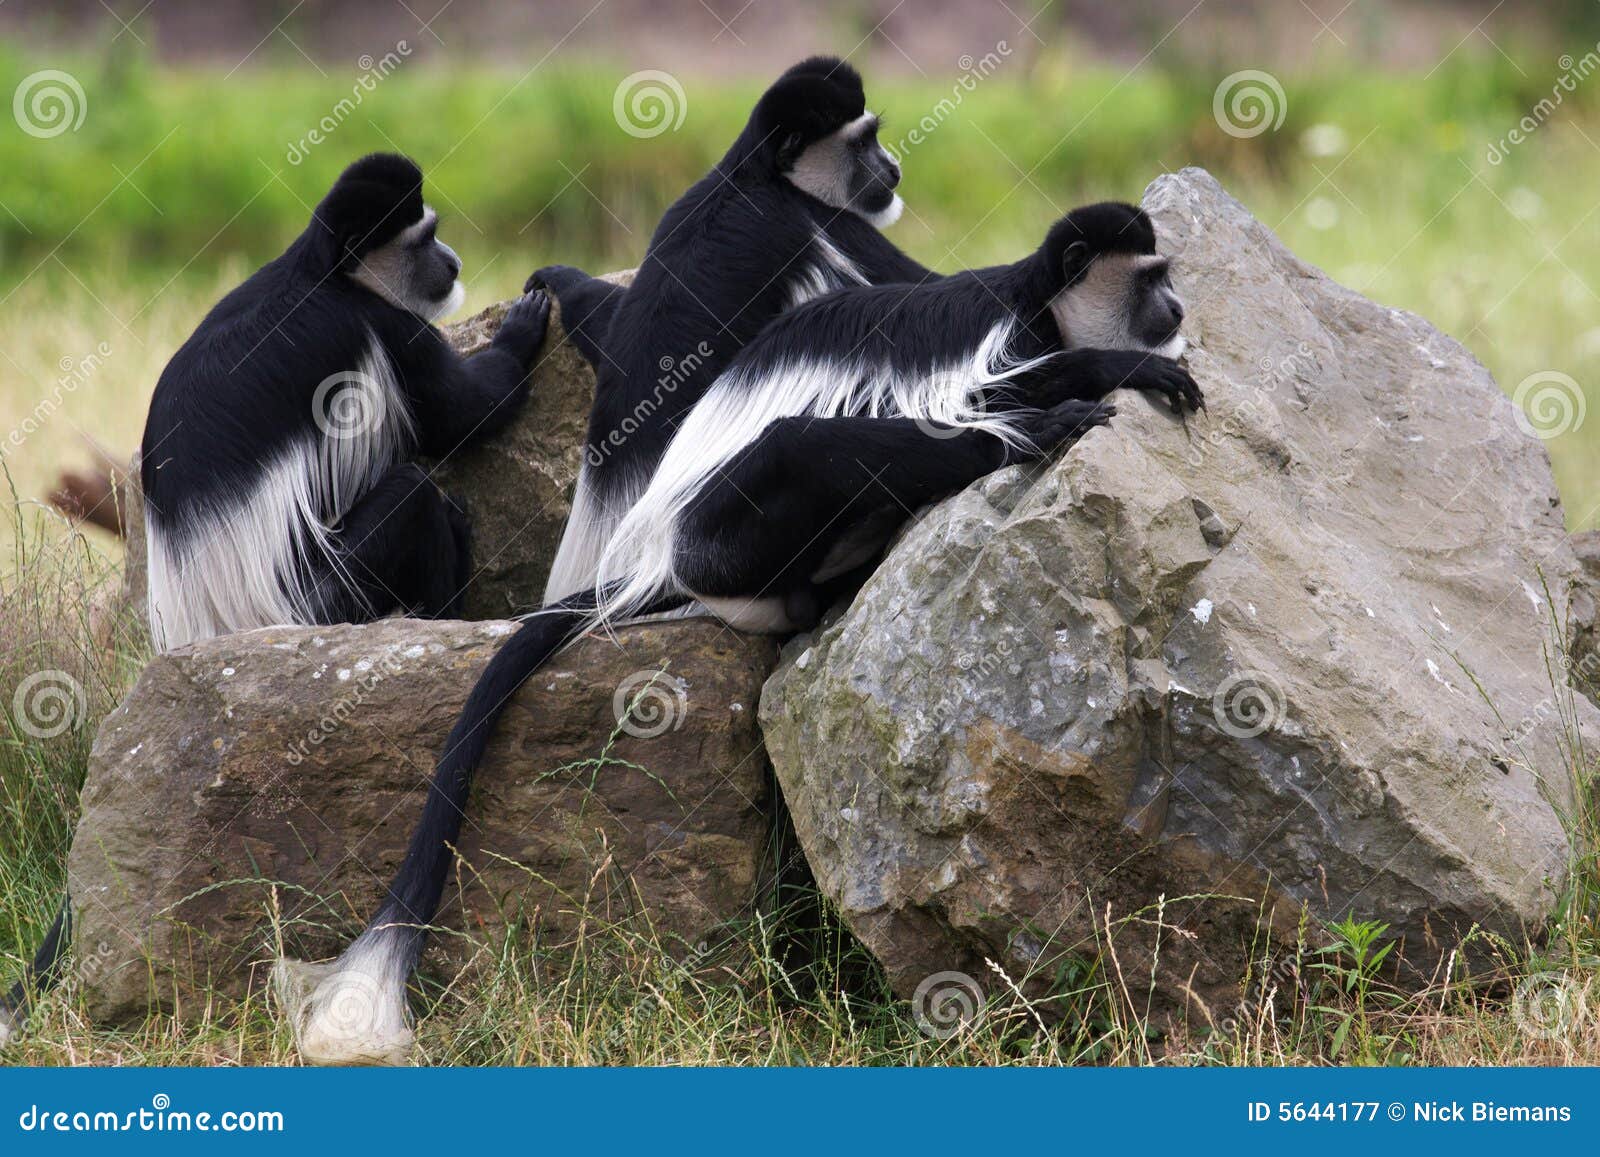 black and white colobus monkeys on the look out